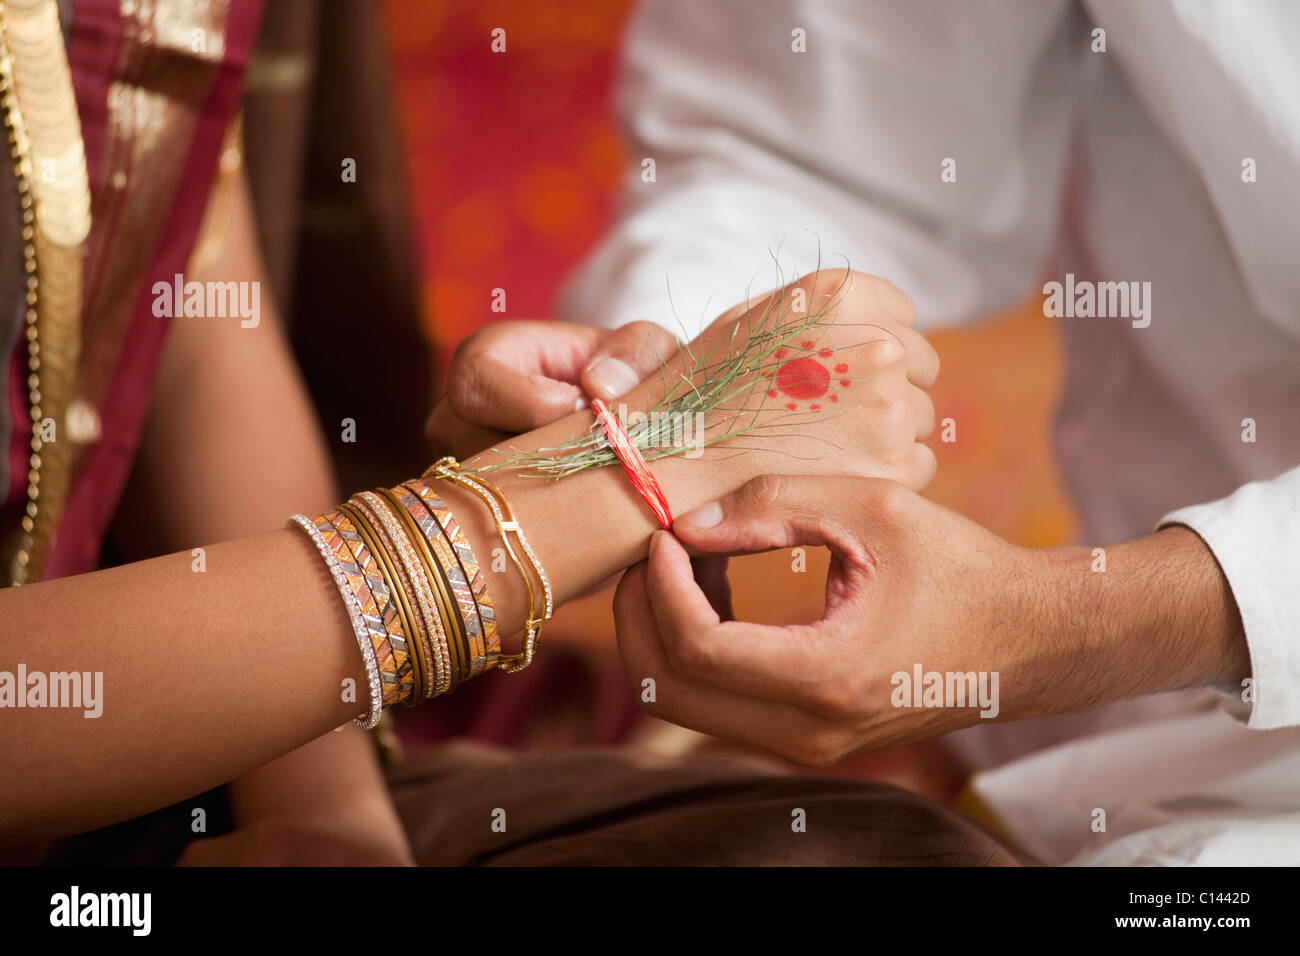 Close-up of a person's hands putting holy thread on a bride's wrist Stock Photo